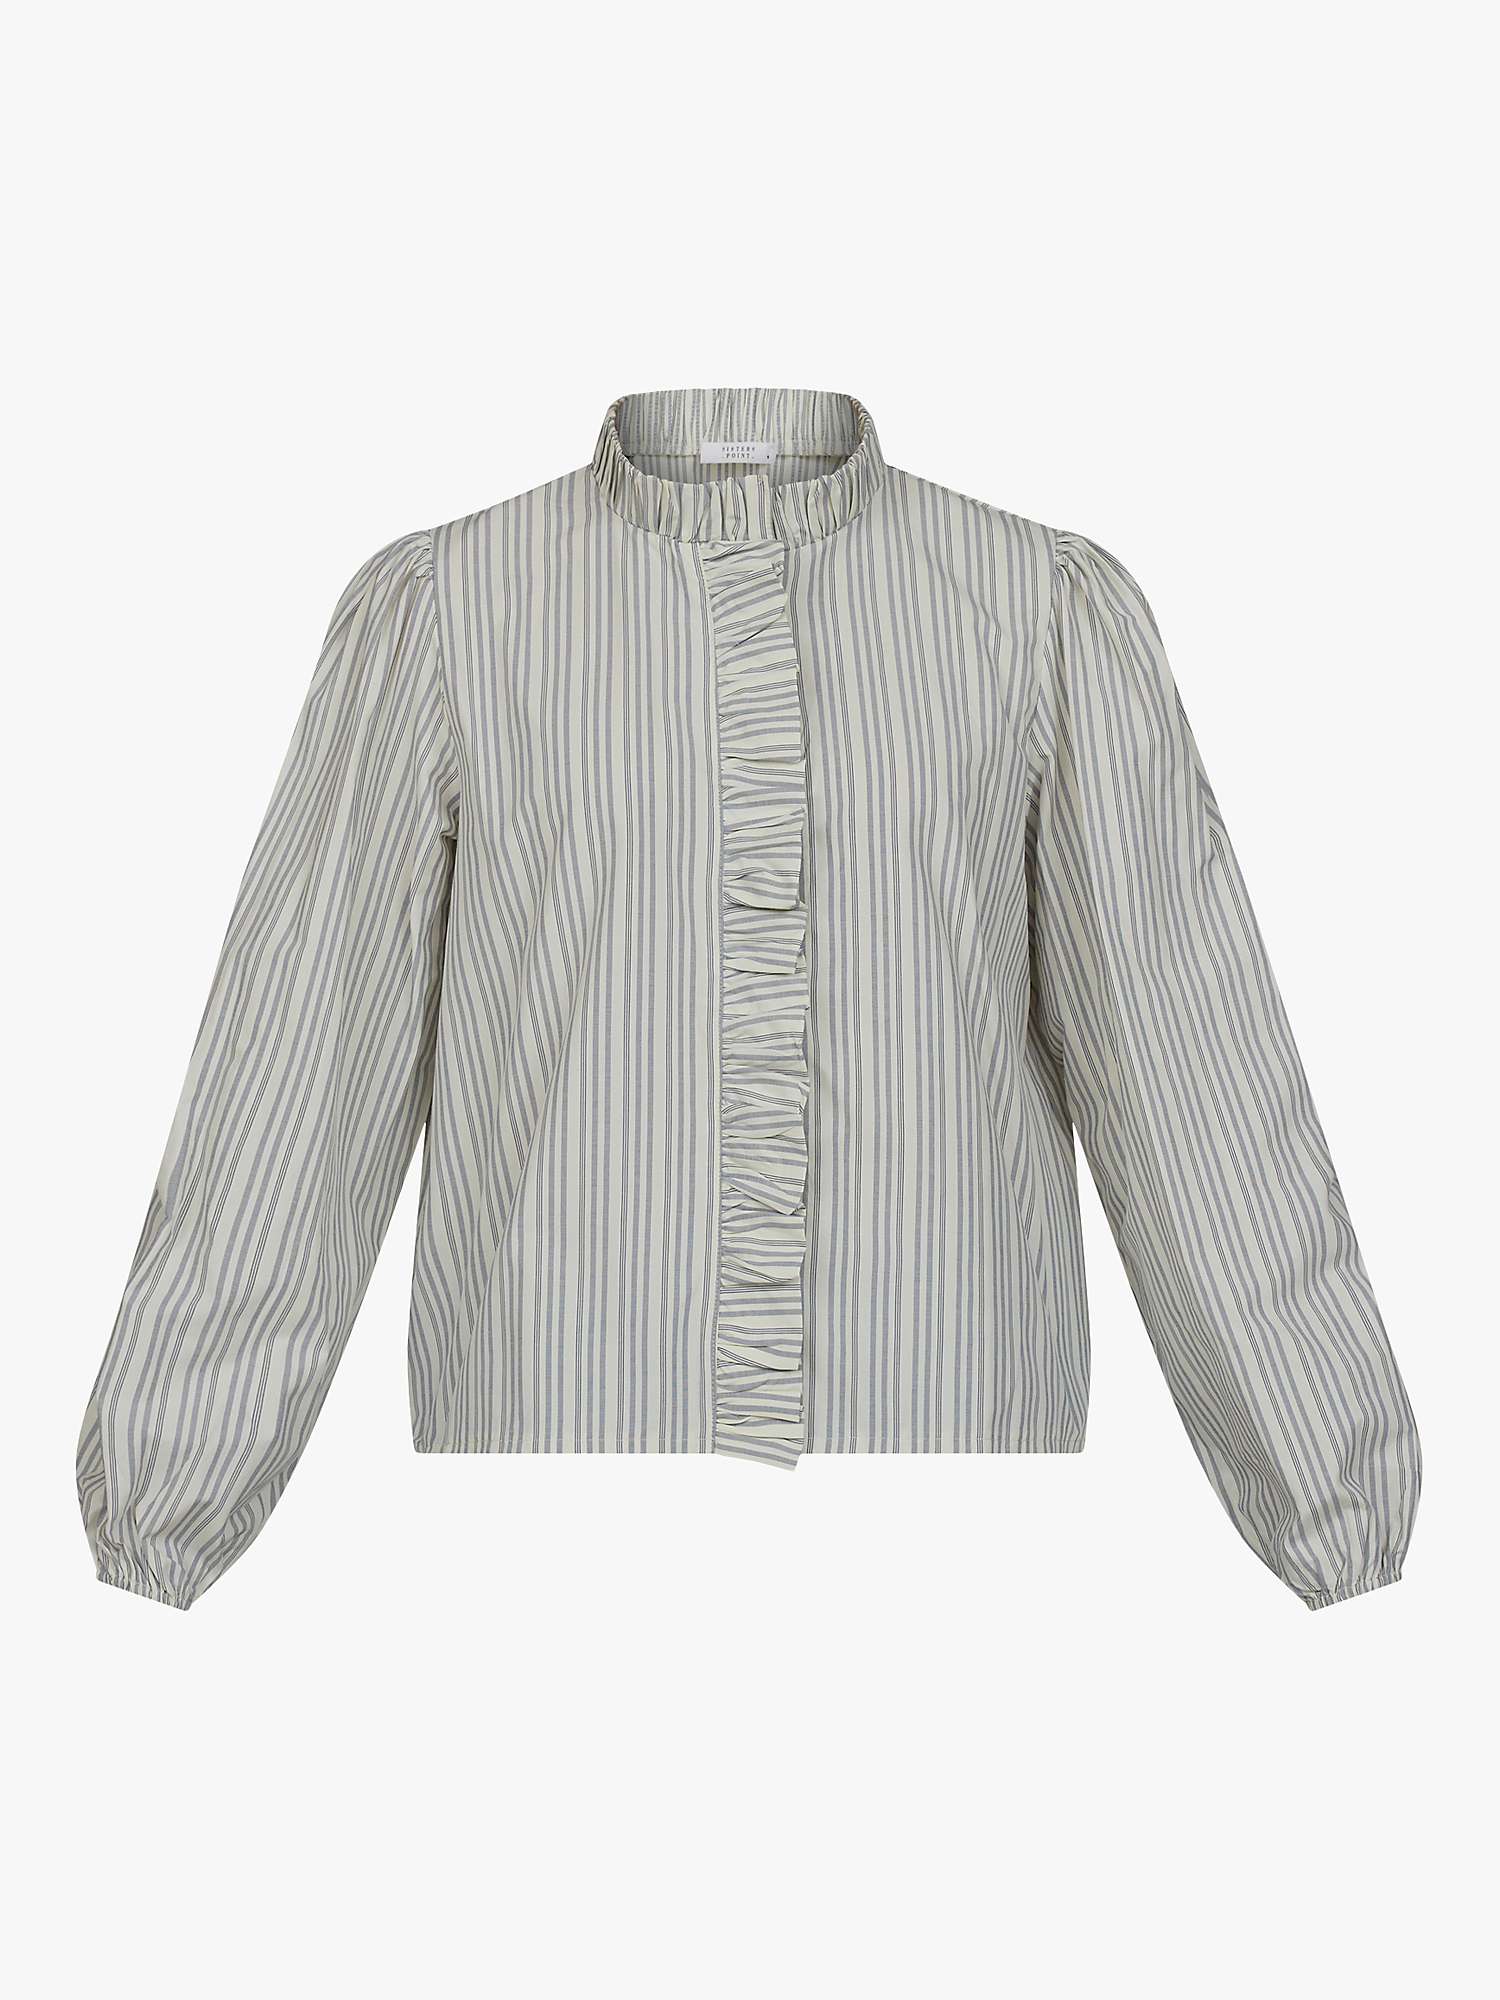 Buy Sisters Point Wrinkle High Collar Shirt Online at johnlewis.com